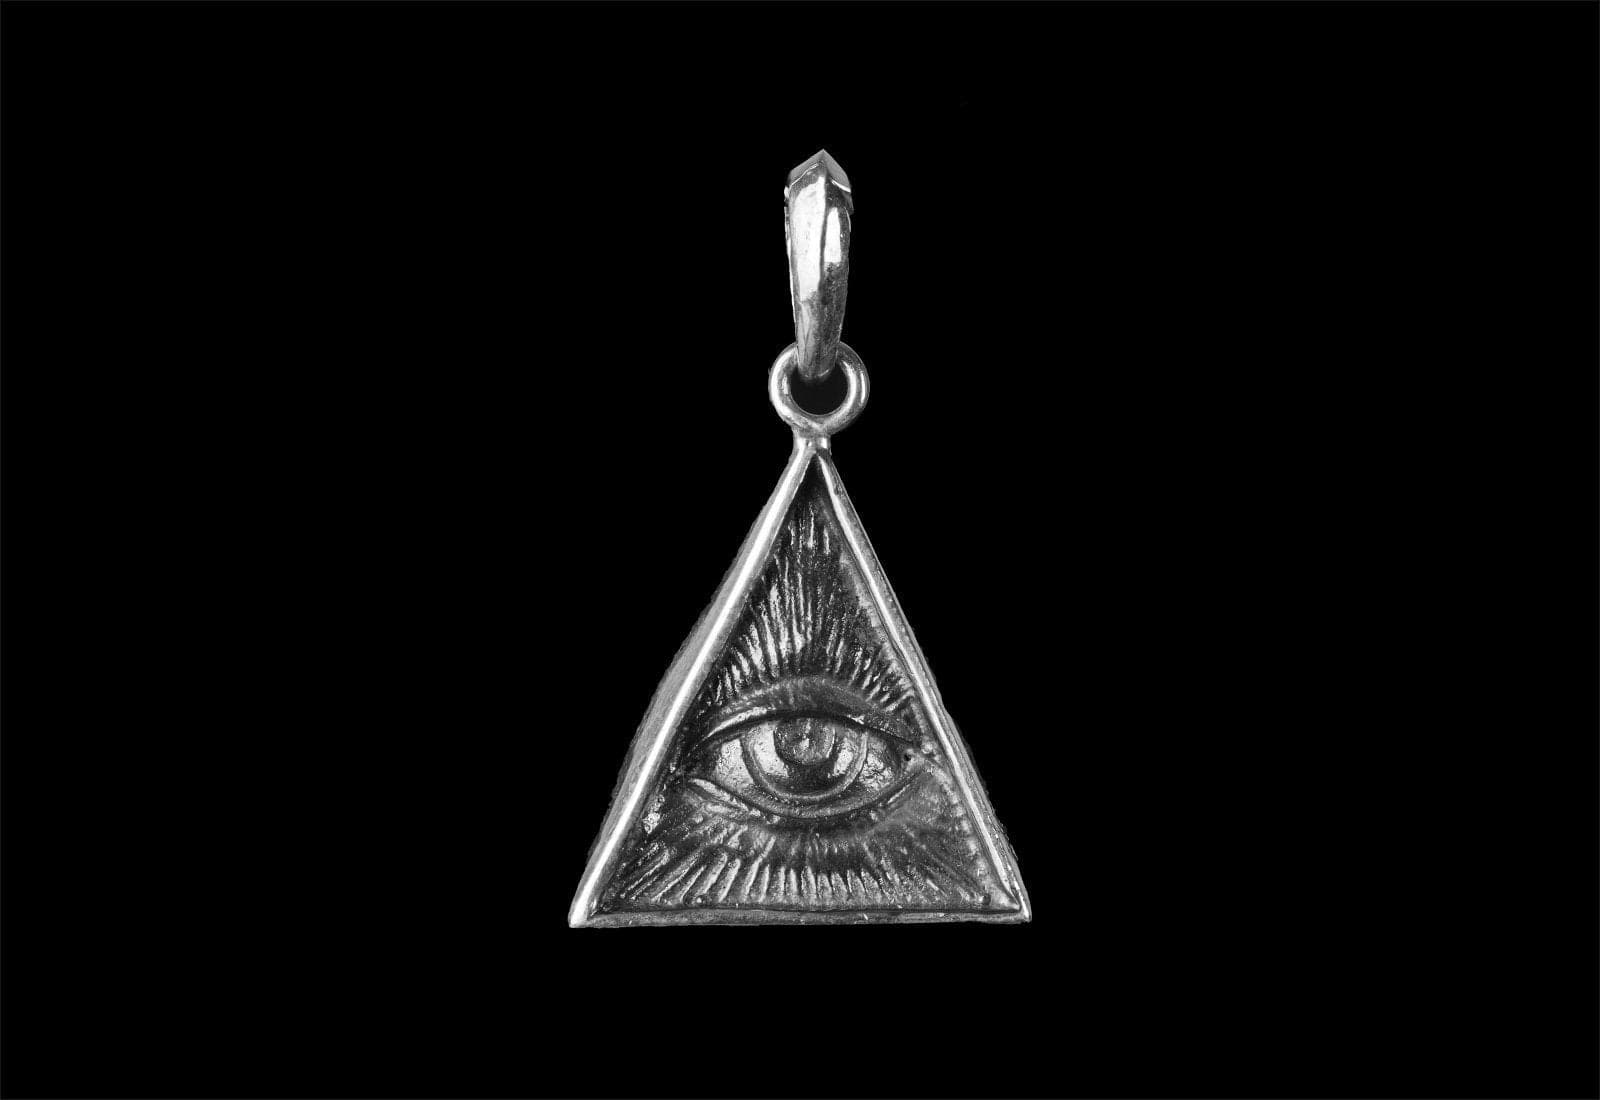 EYE OF THE PROVIDENCE TRIANGLE